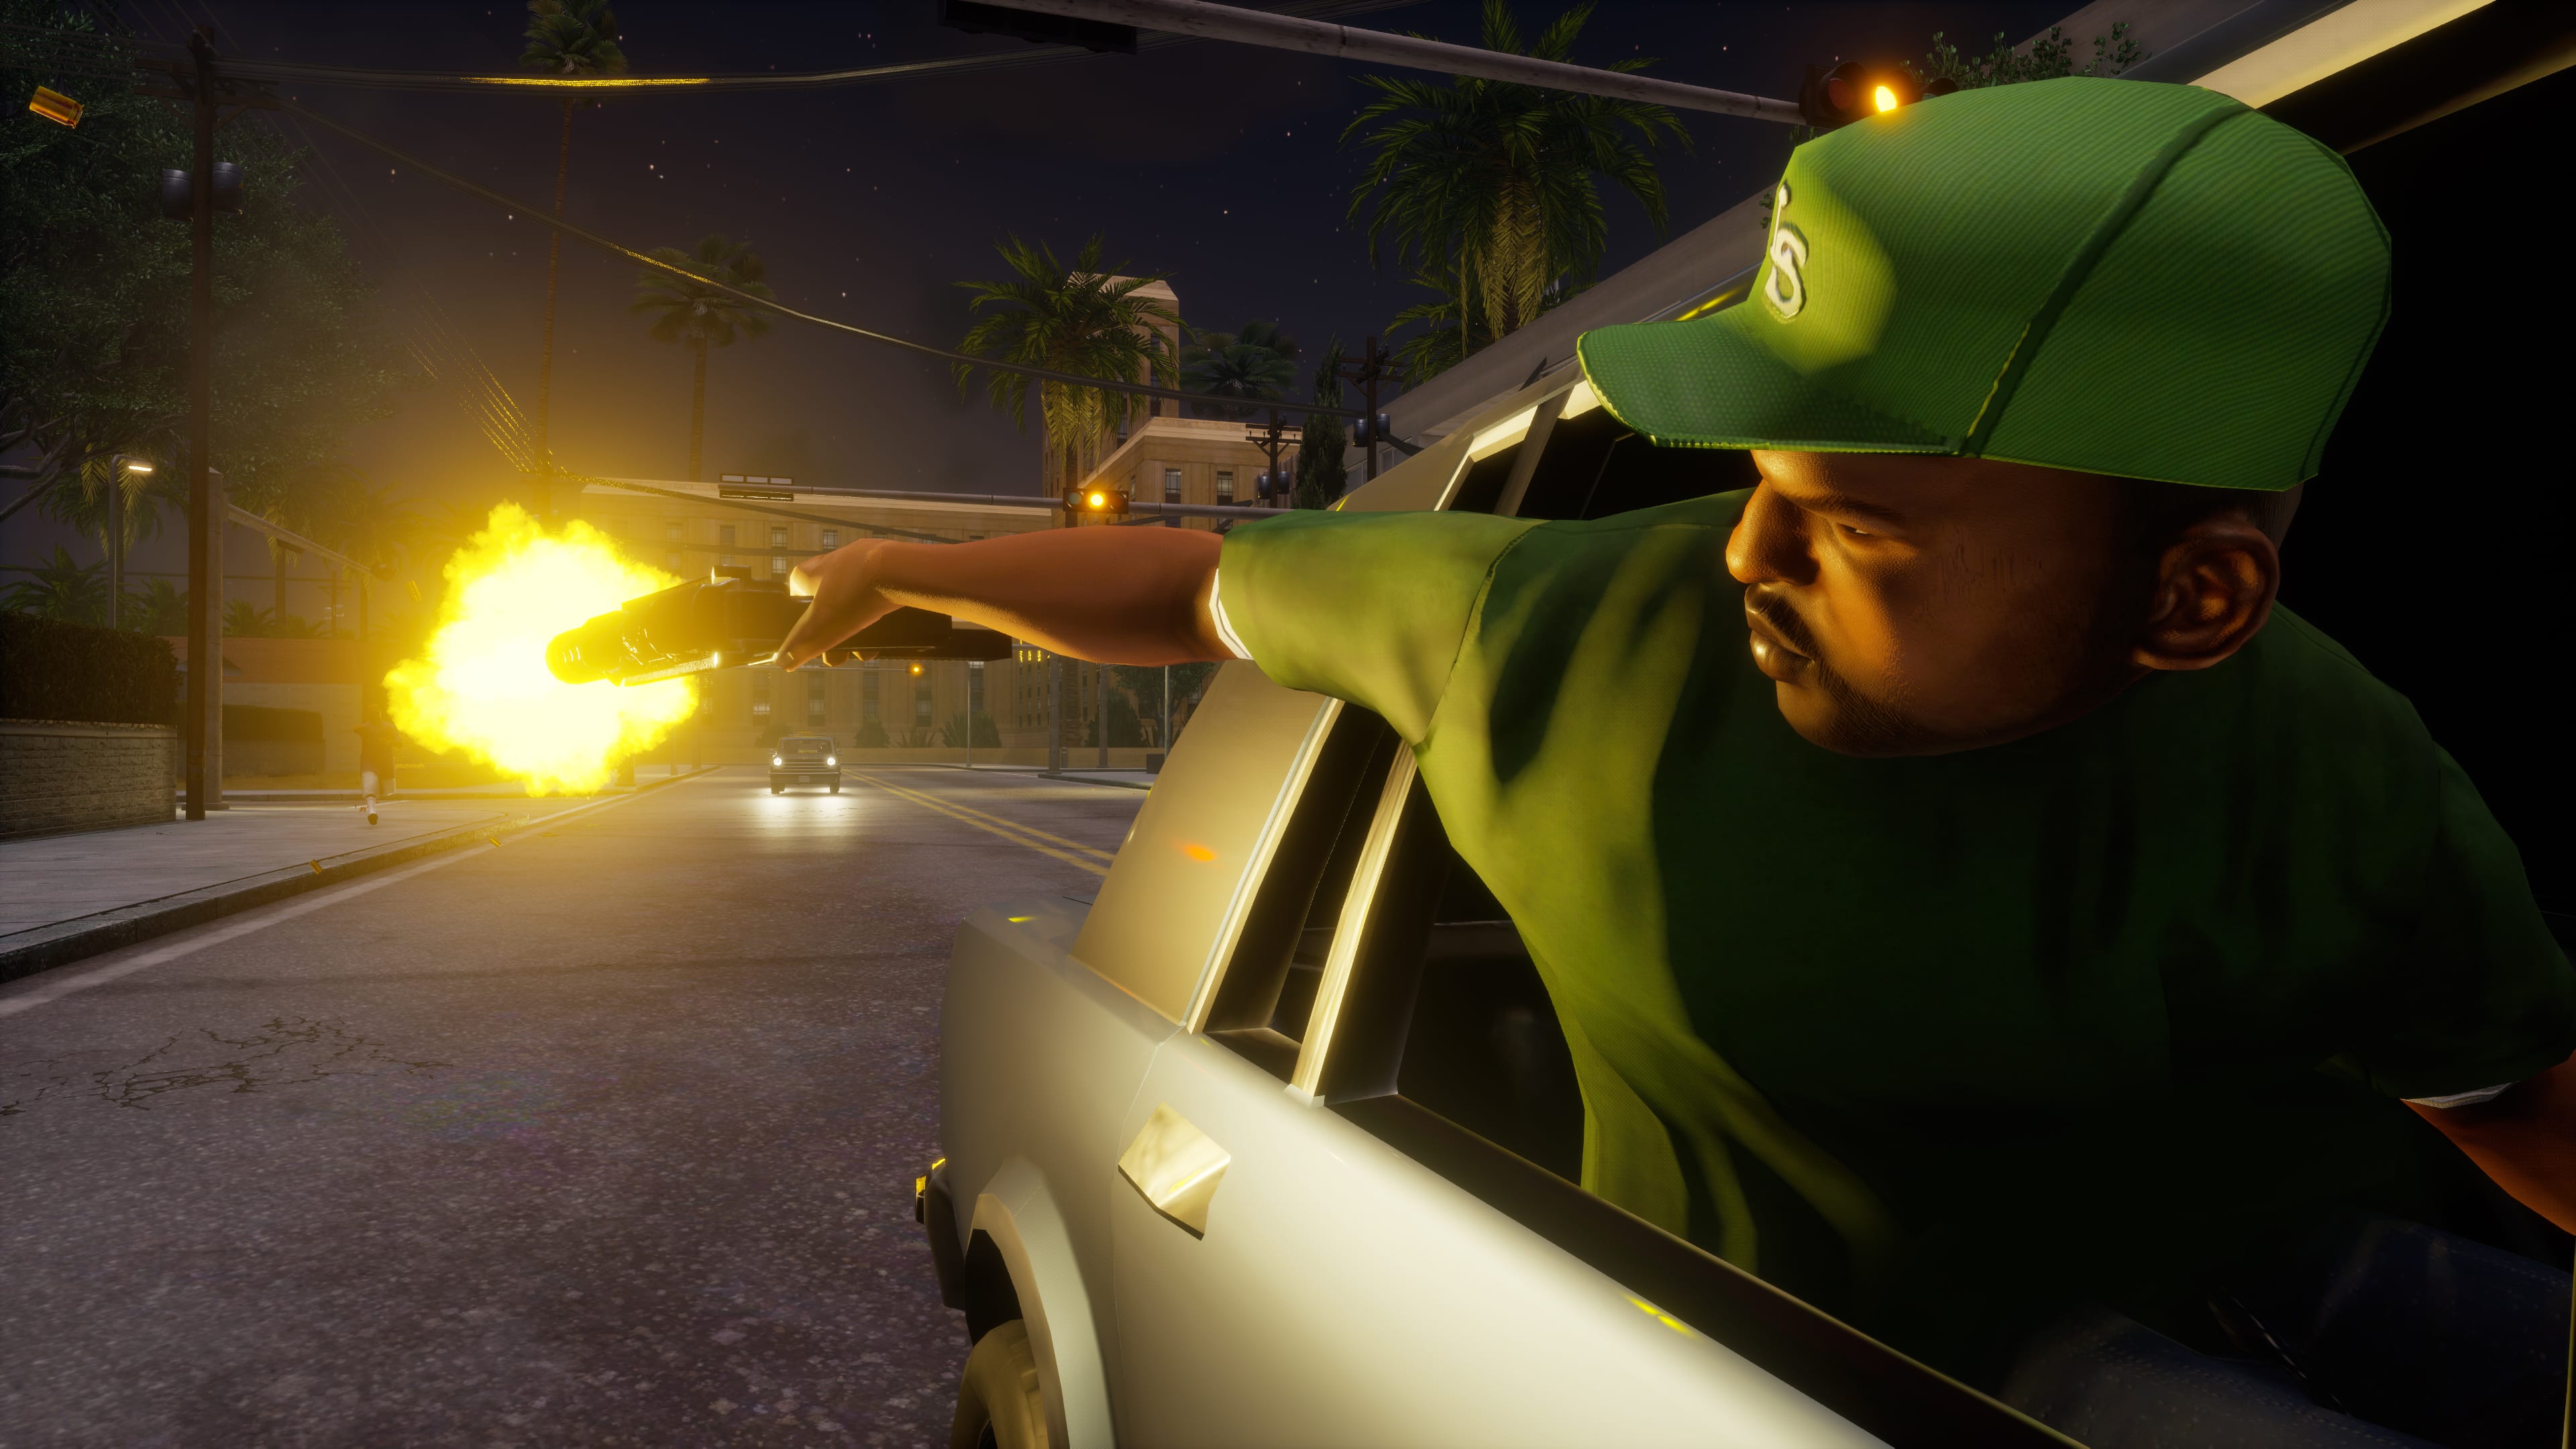 Grand Theft Auto: San Andreas – The Definitive Edition Coming Soon - Epic  Games Store